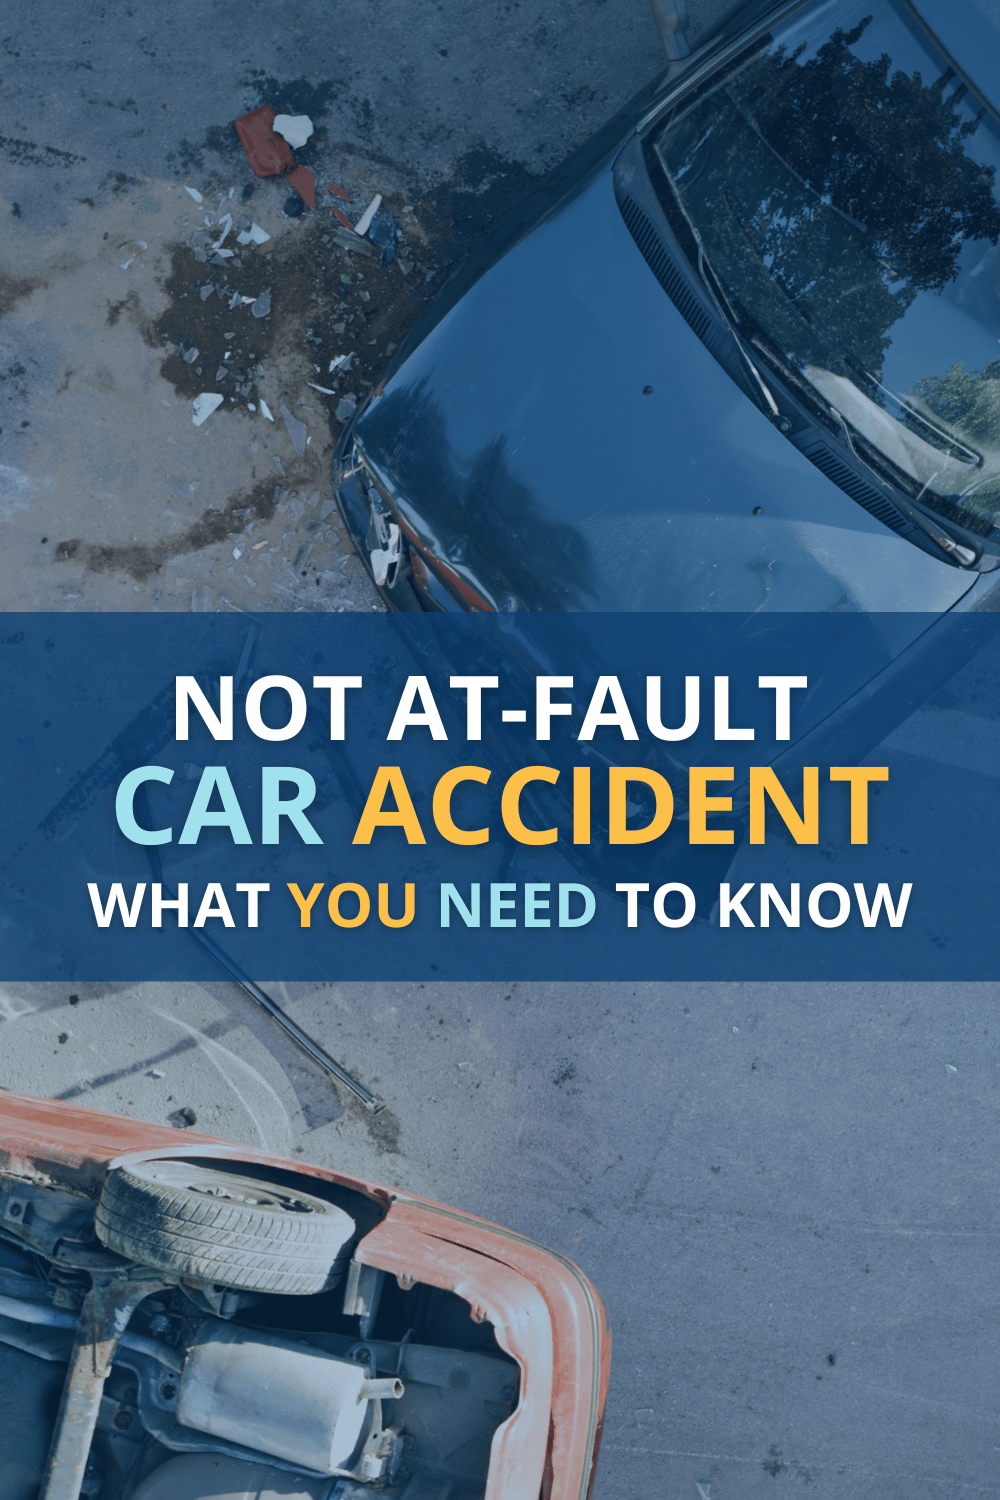 Car Accident And Not At-Fault In Michigan: What You Need To Know